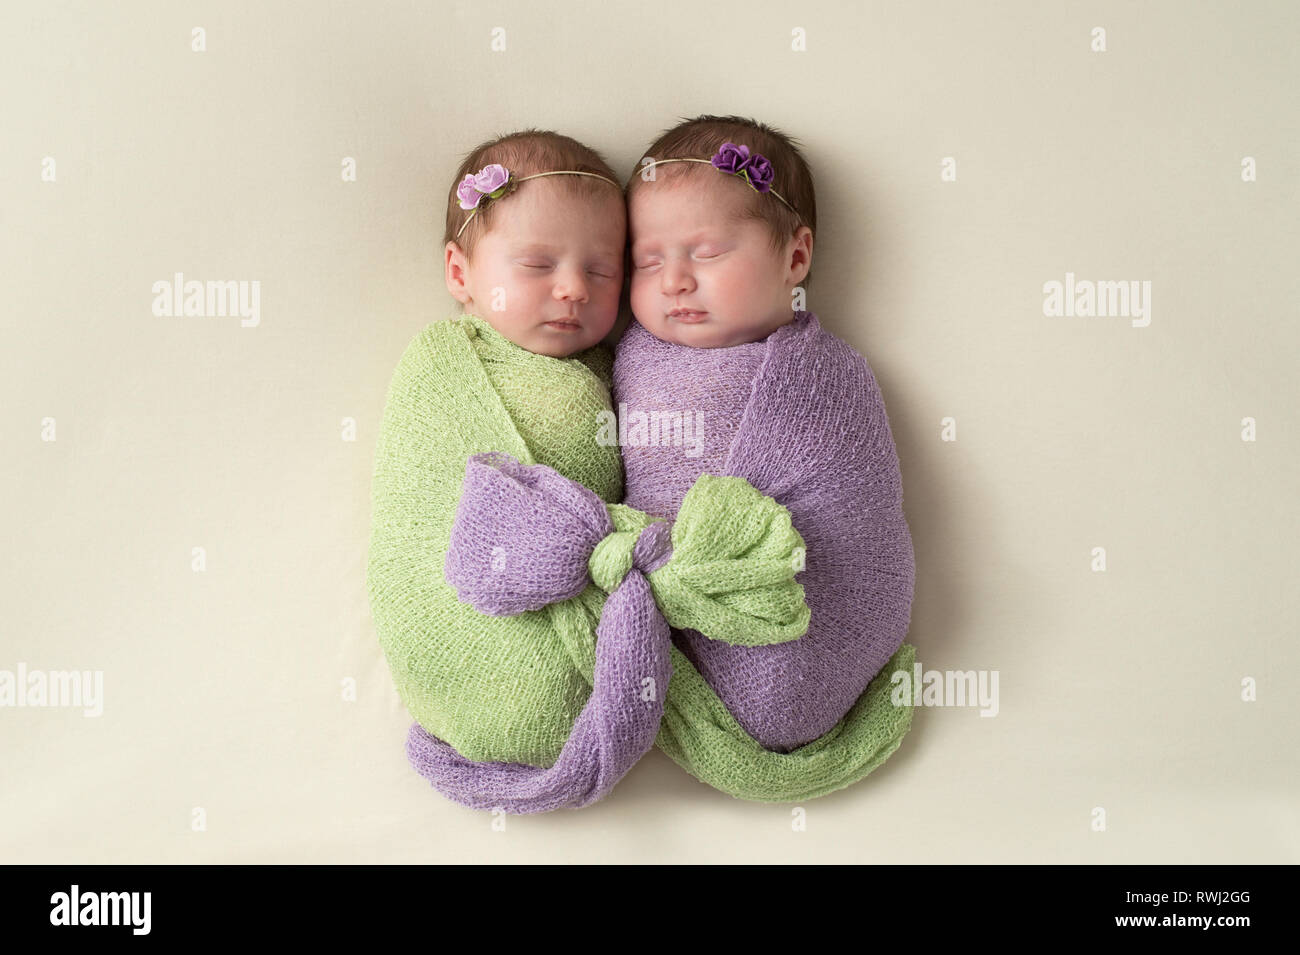 Fraternal twin newborn baby girls swaddled together in light green and lavender stretch wrap material. Stock Photo